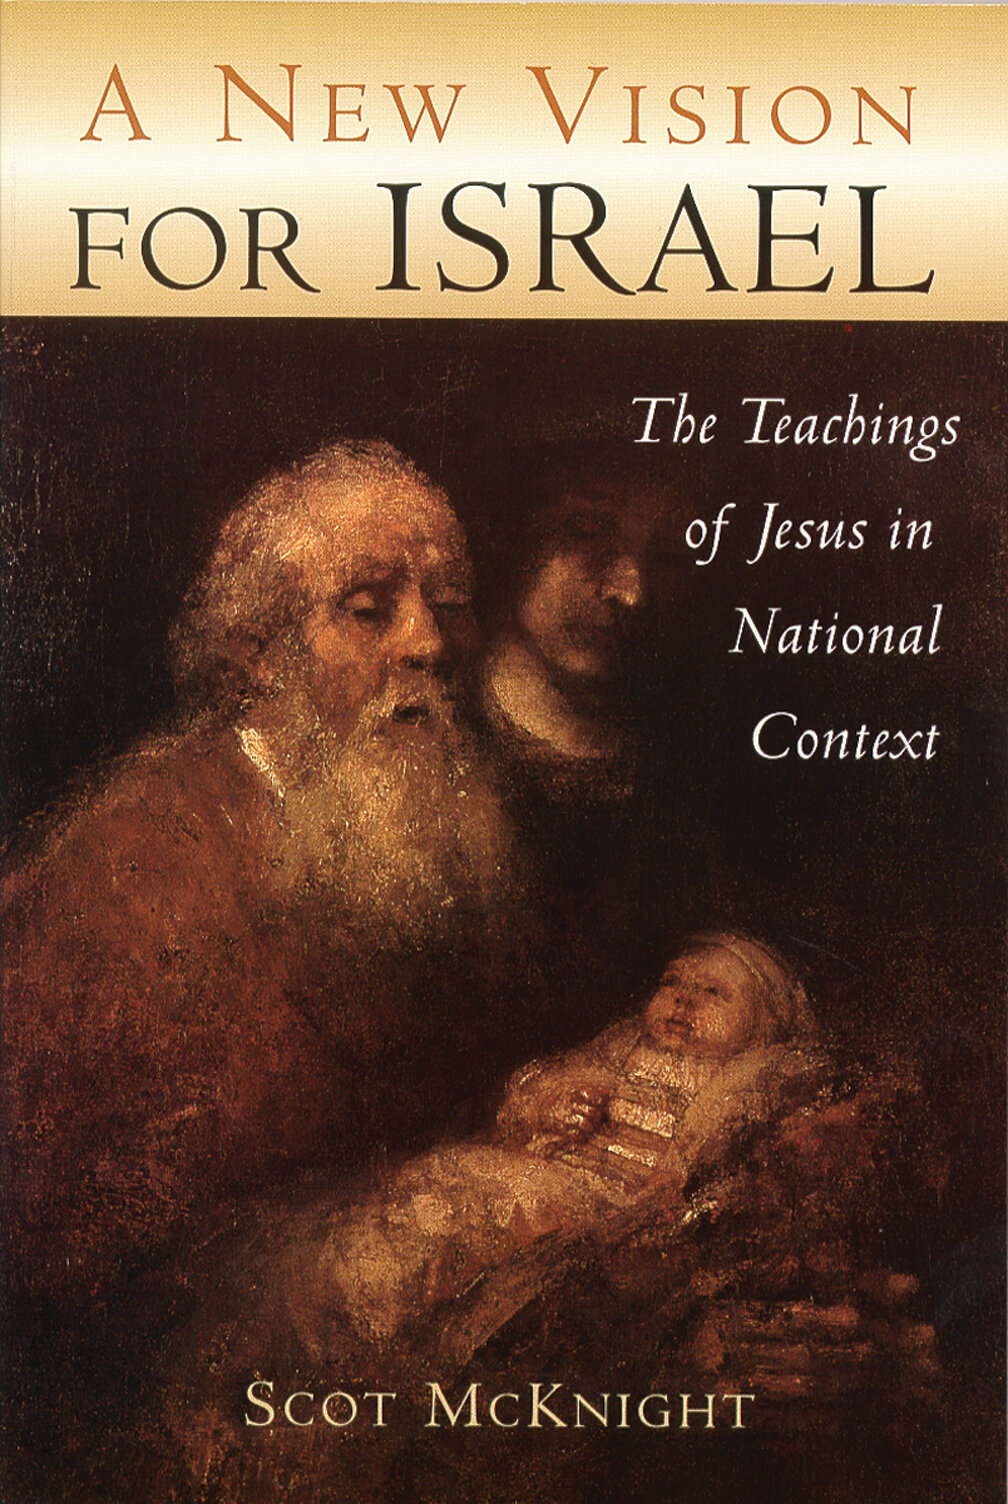 A New Vision For Israel: The Teachings of Jesus in National Context